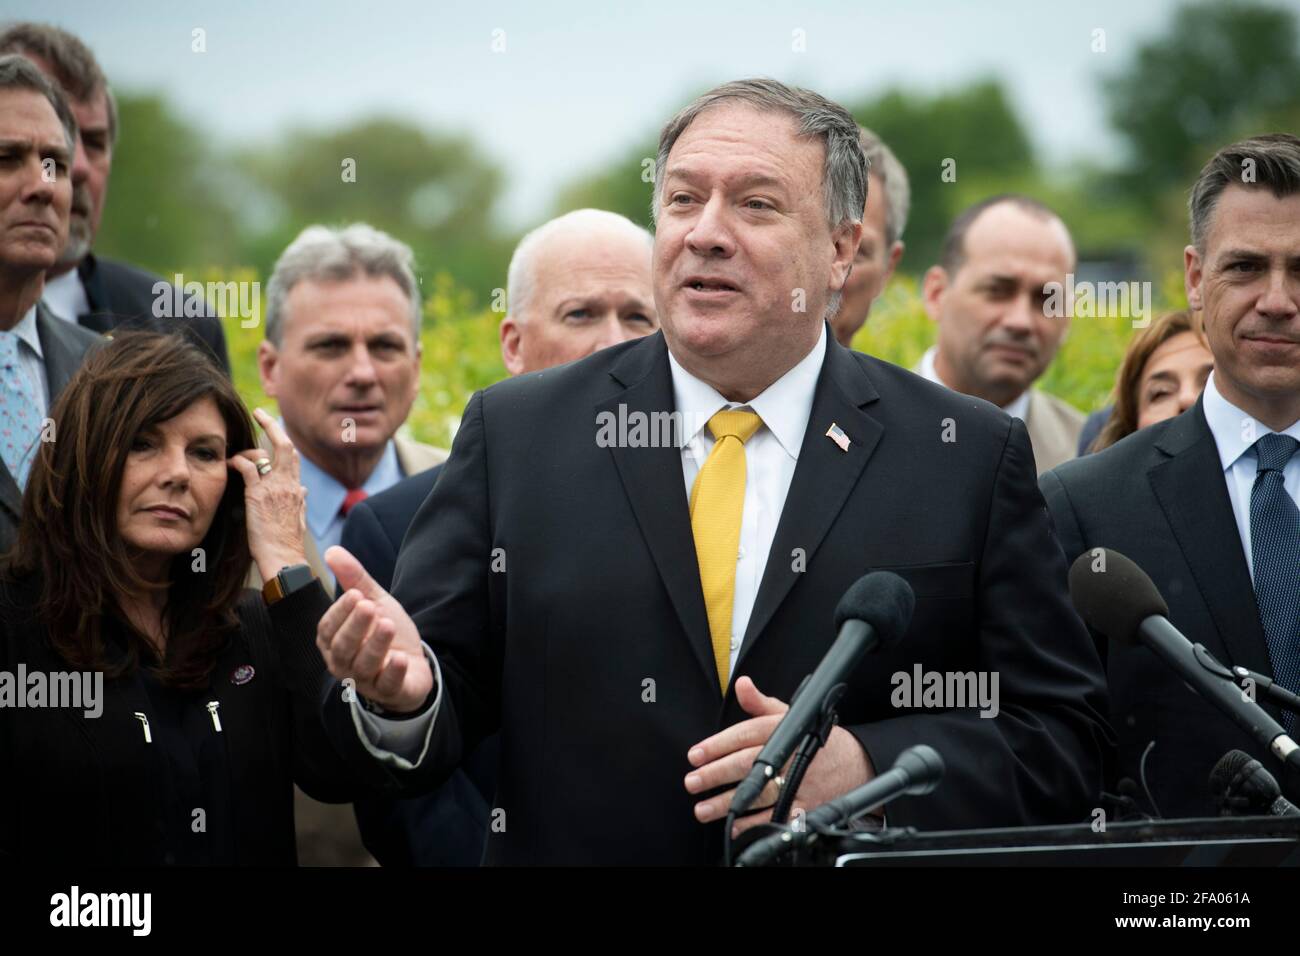 Former US Secretary of State Mike Pompeo, offers remarks while joined by members of the Republican Study Committee to introduce their Maximum Pressure Act against Iran, outside of the US Capitol in Washington, DC, Wednesday, April 21, 2021. Credit: Rod Lamkey/CNP /MediaPunch Stock Photo